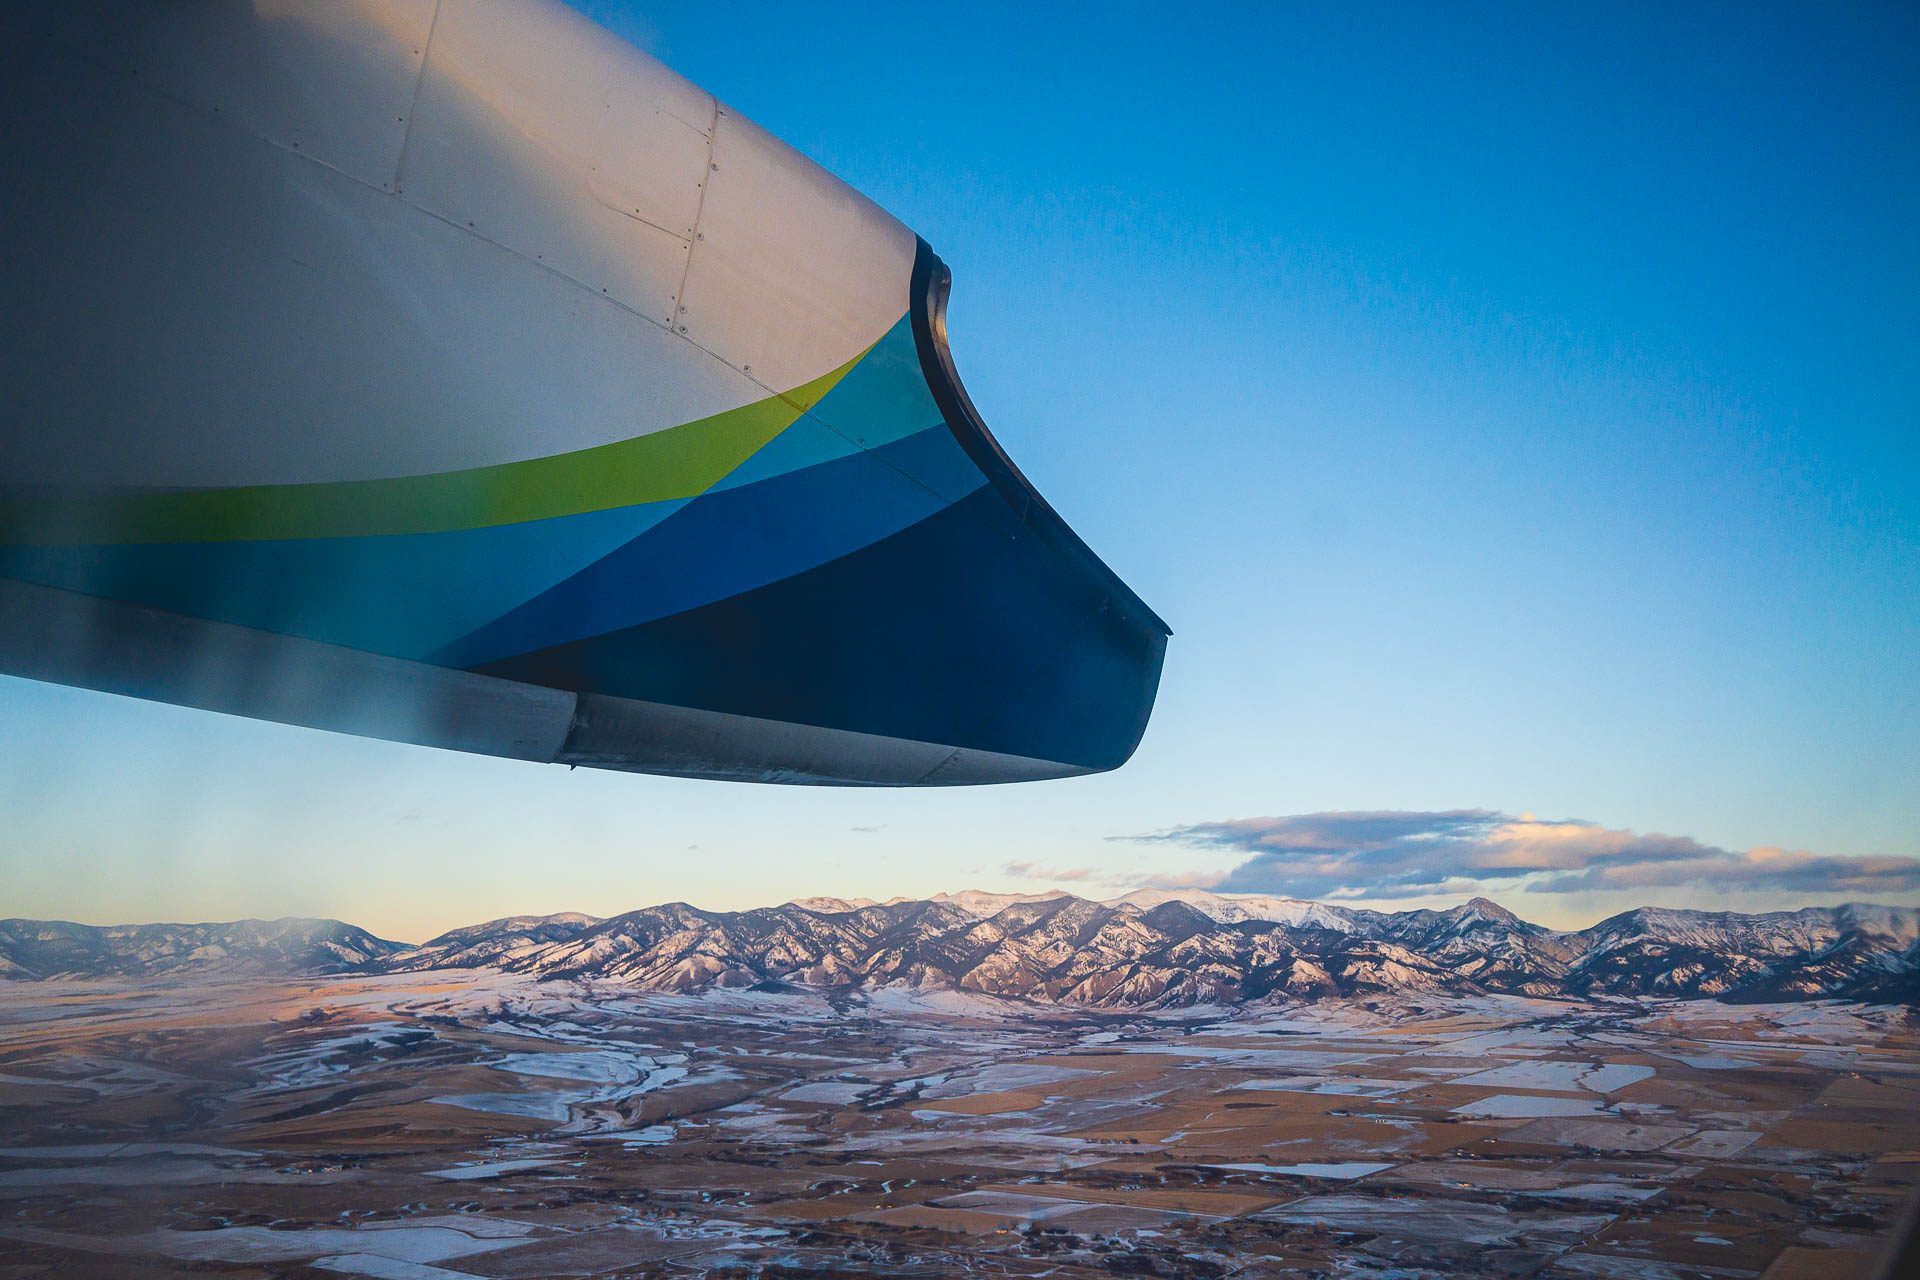 View of the Bridger Mountains taken from an airplane with the back side of the engine in frame on a blue sky day